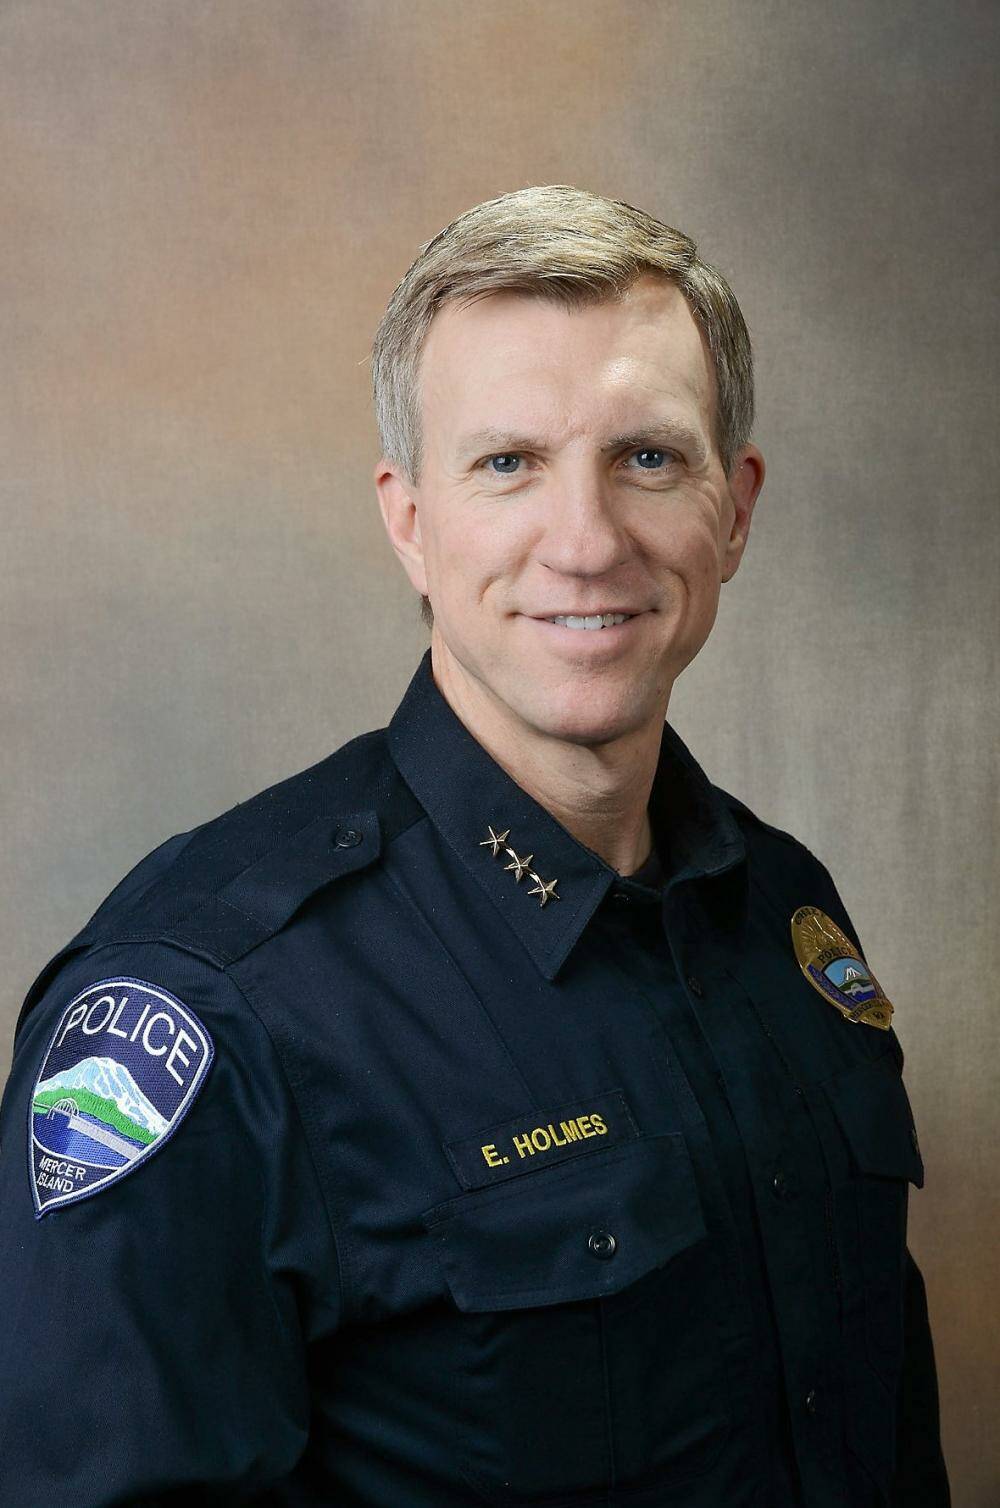 Mercer Island Police Department Chief Ed Holmes. Courtesy photo